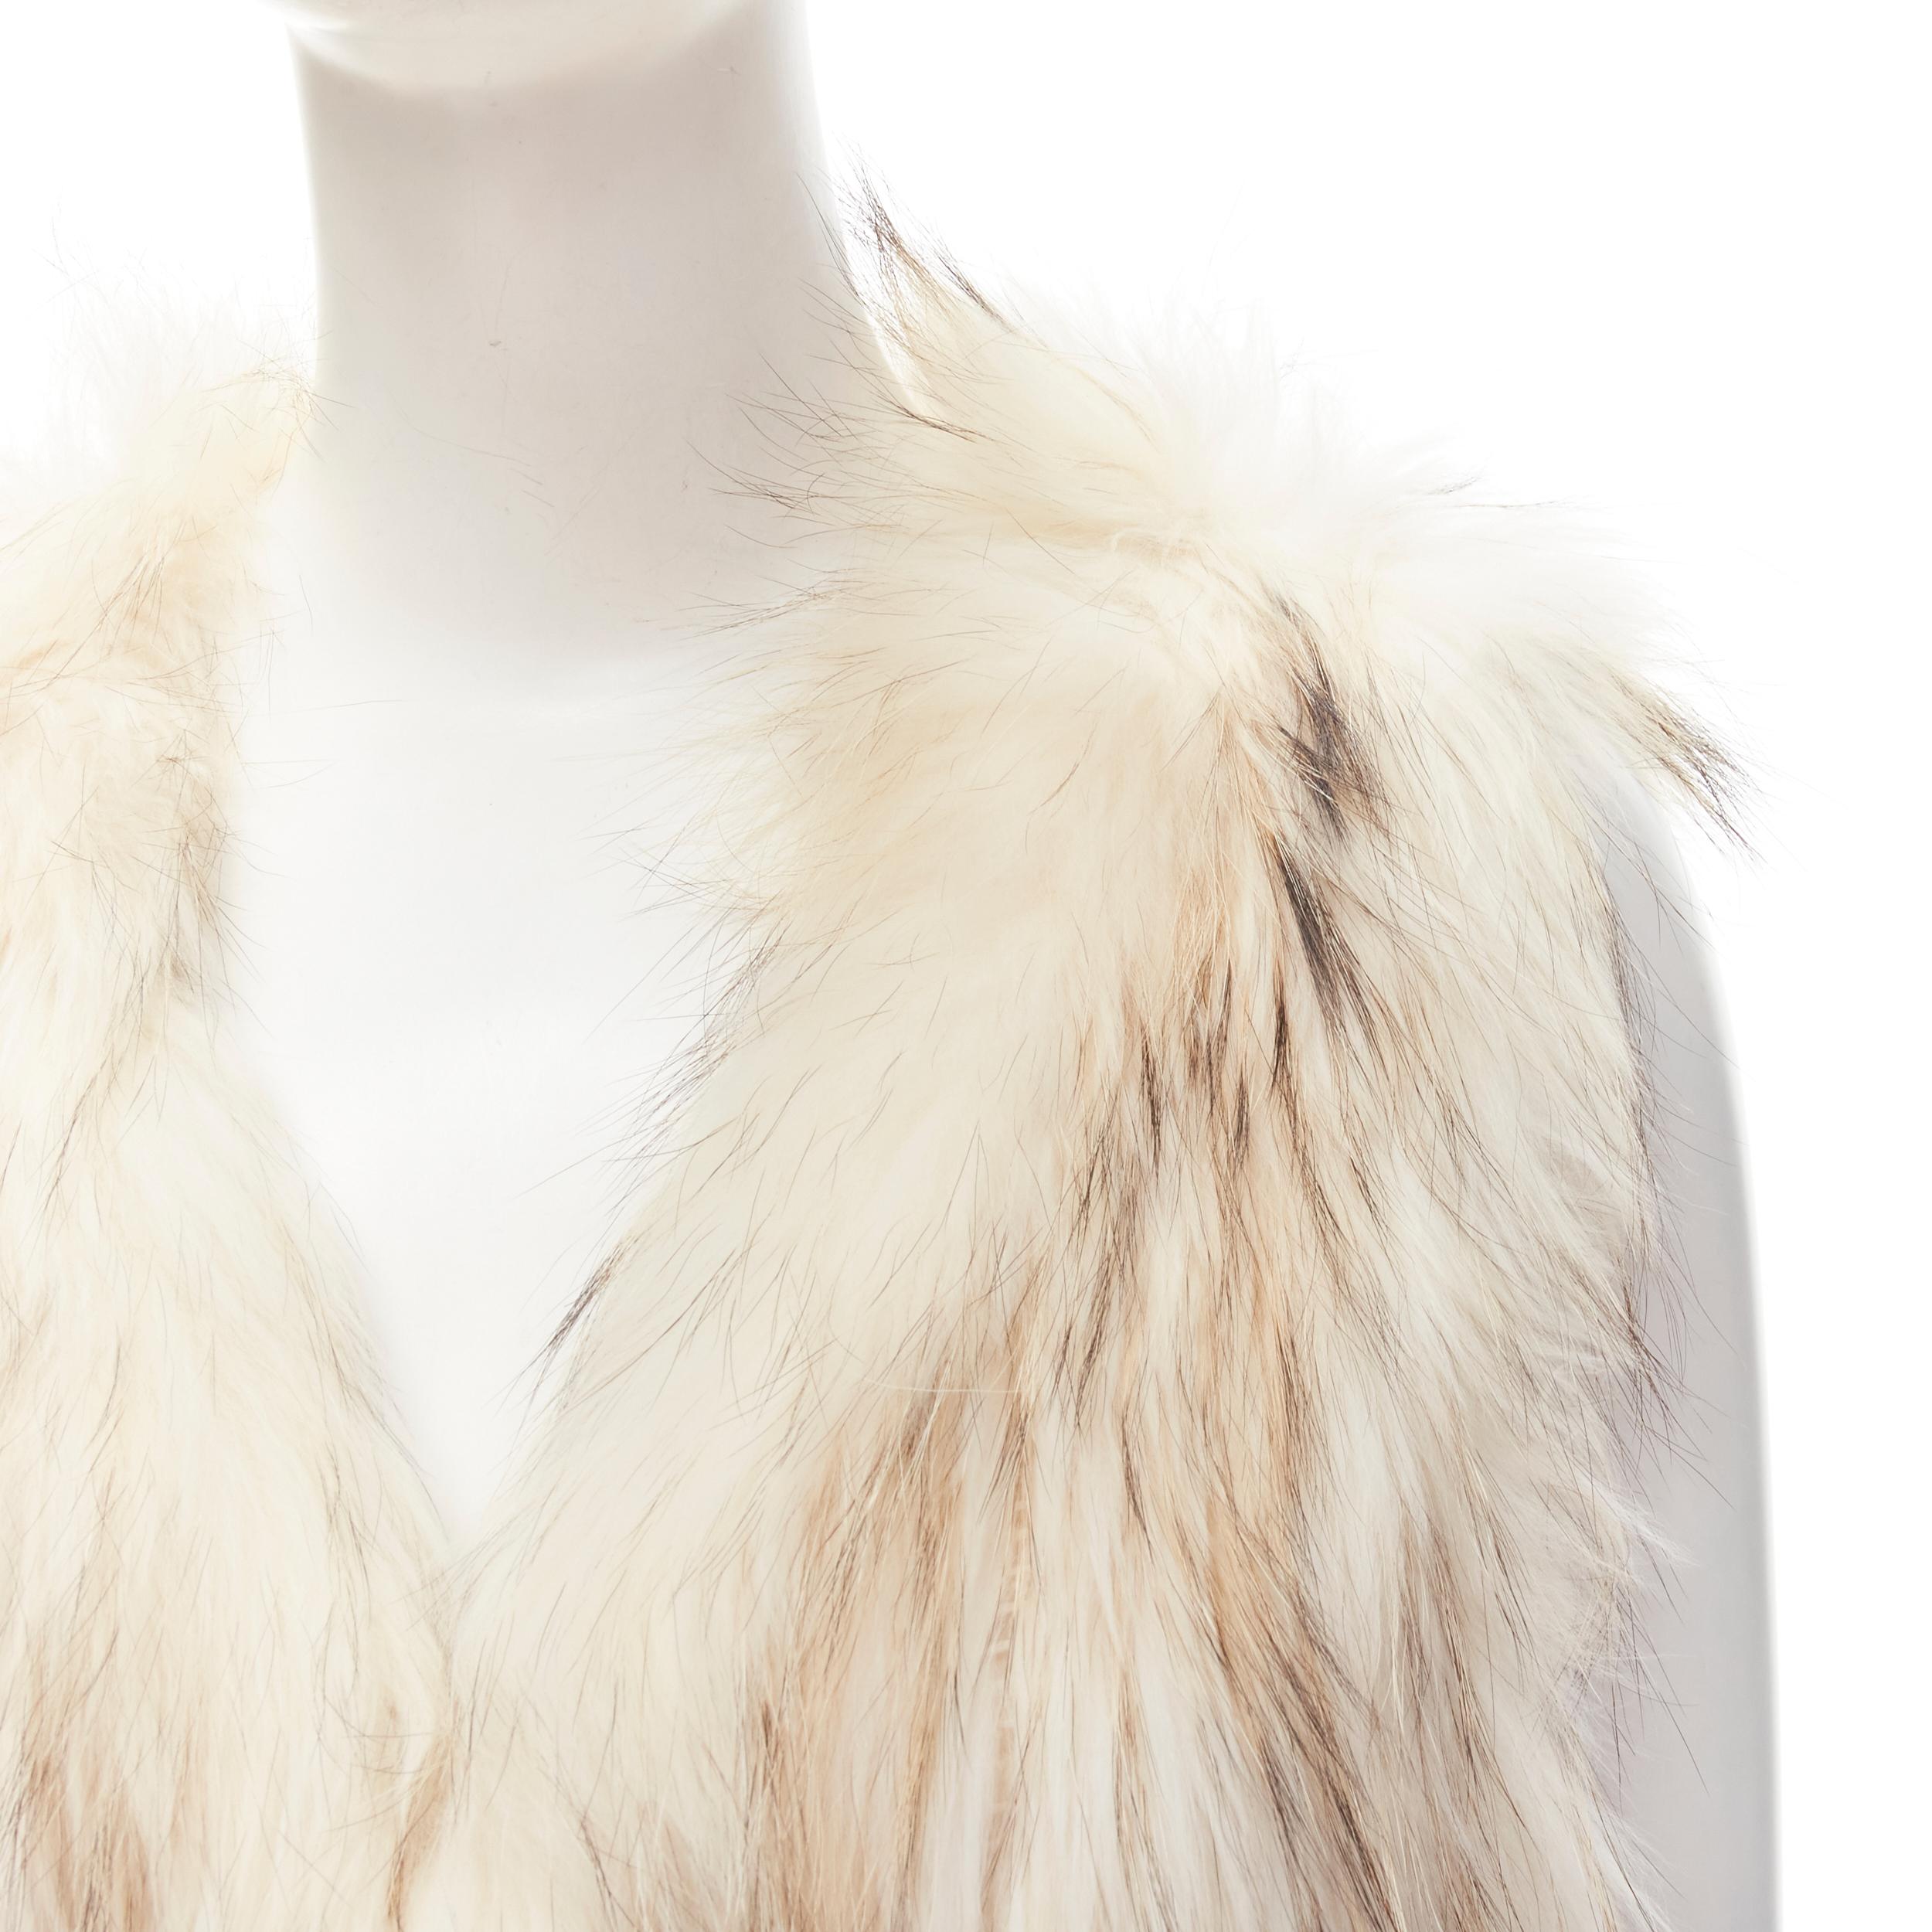 METEO YVES SALOMON cream raccoon fur vest jacket IT36 XS
Brand: Mateo Yves Salomon
Extra Detail: Racoon fur dyed in cream brown.

CONDITION:
Condition: Excellent, this item was pre-owned and is in excellent condition. 

SIZING:
Designer Size: IT